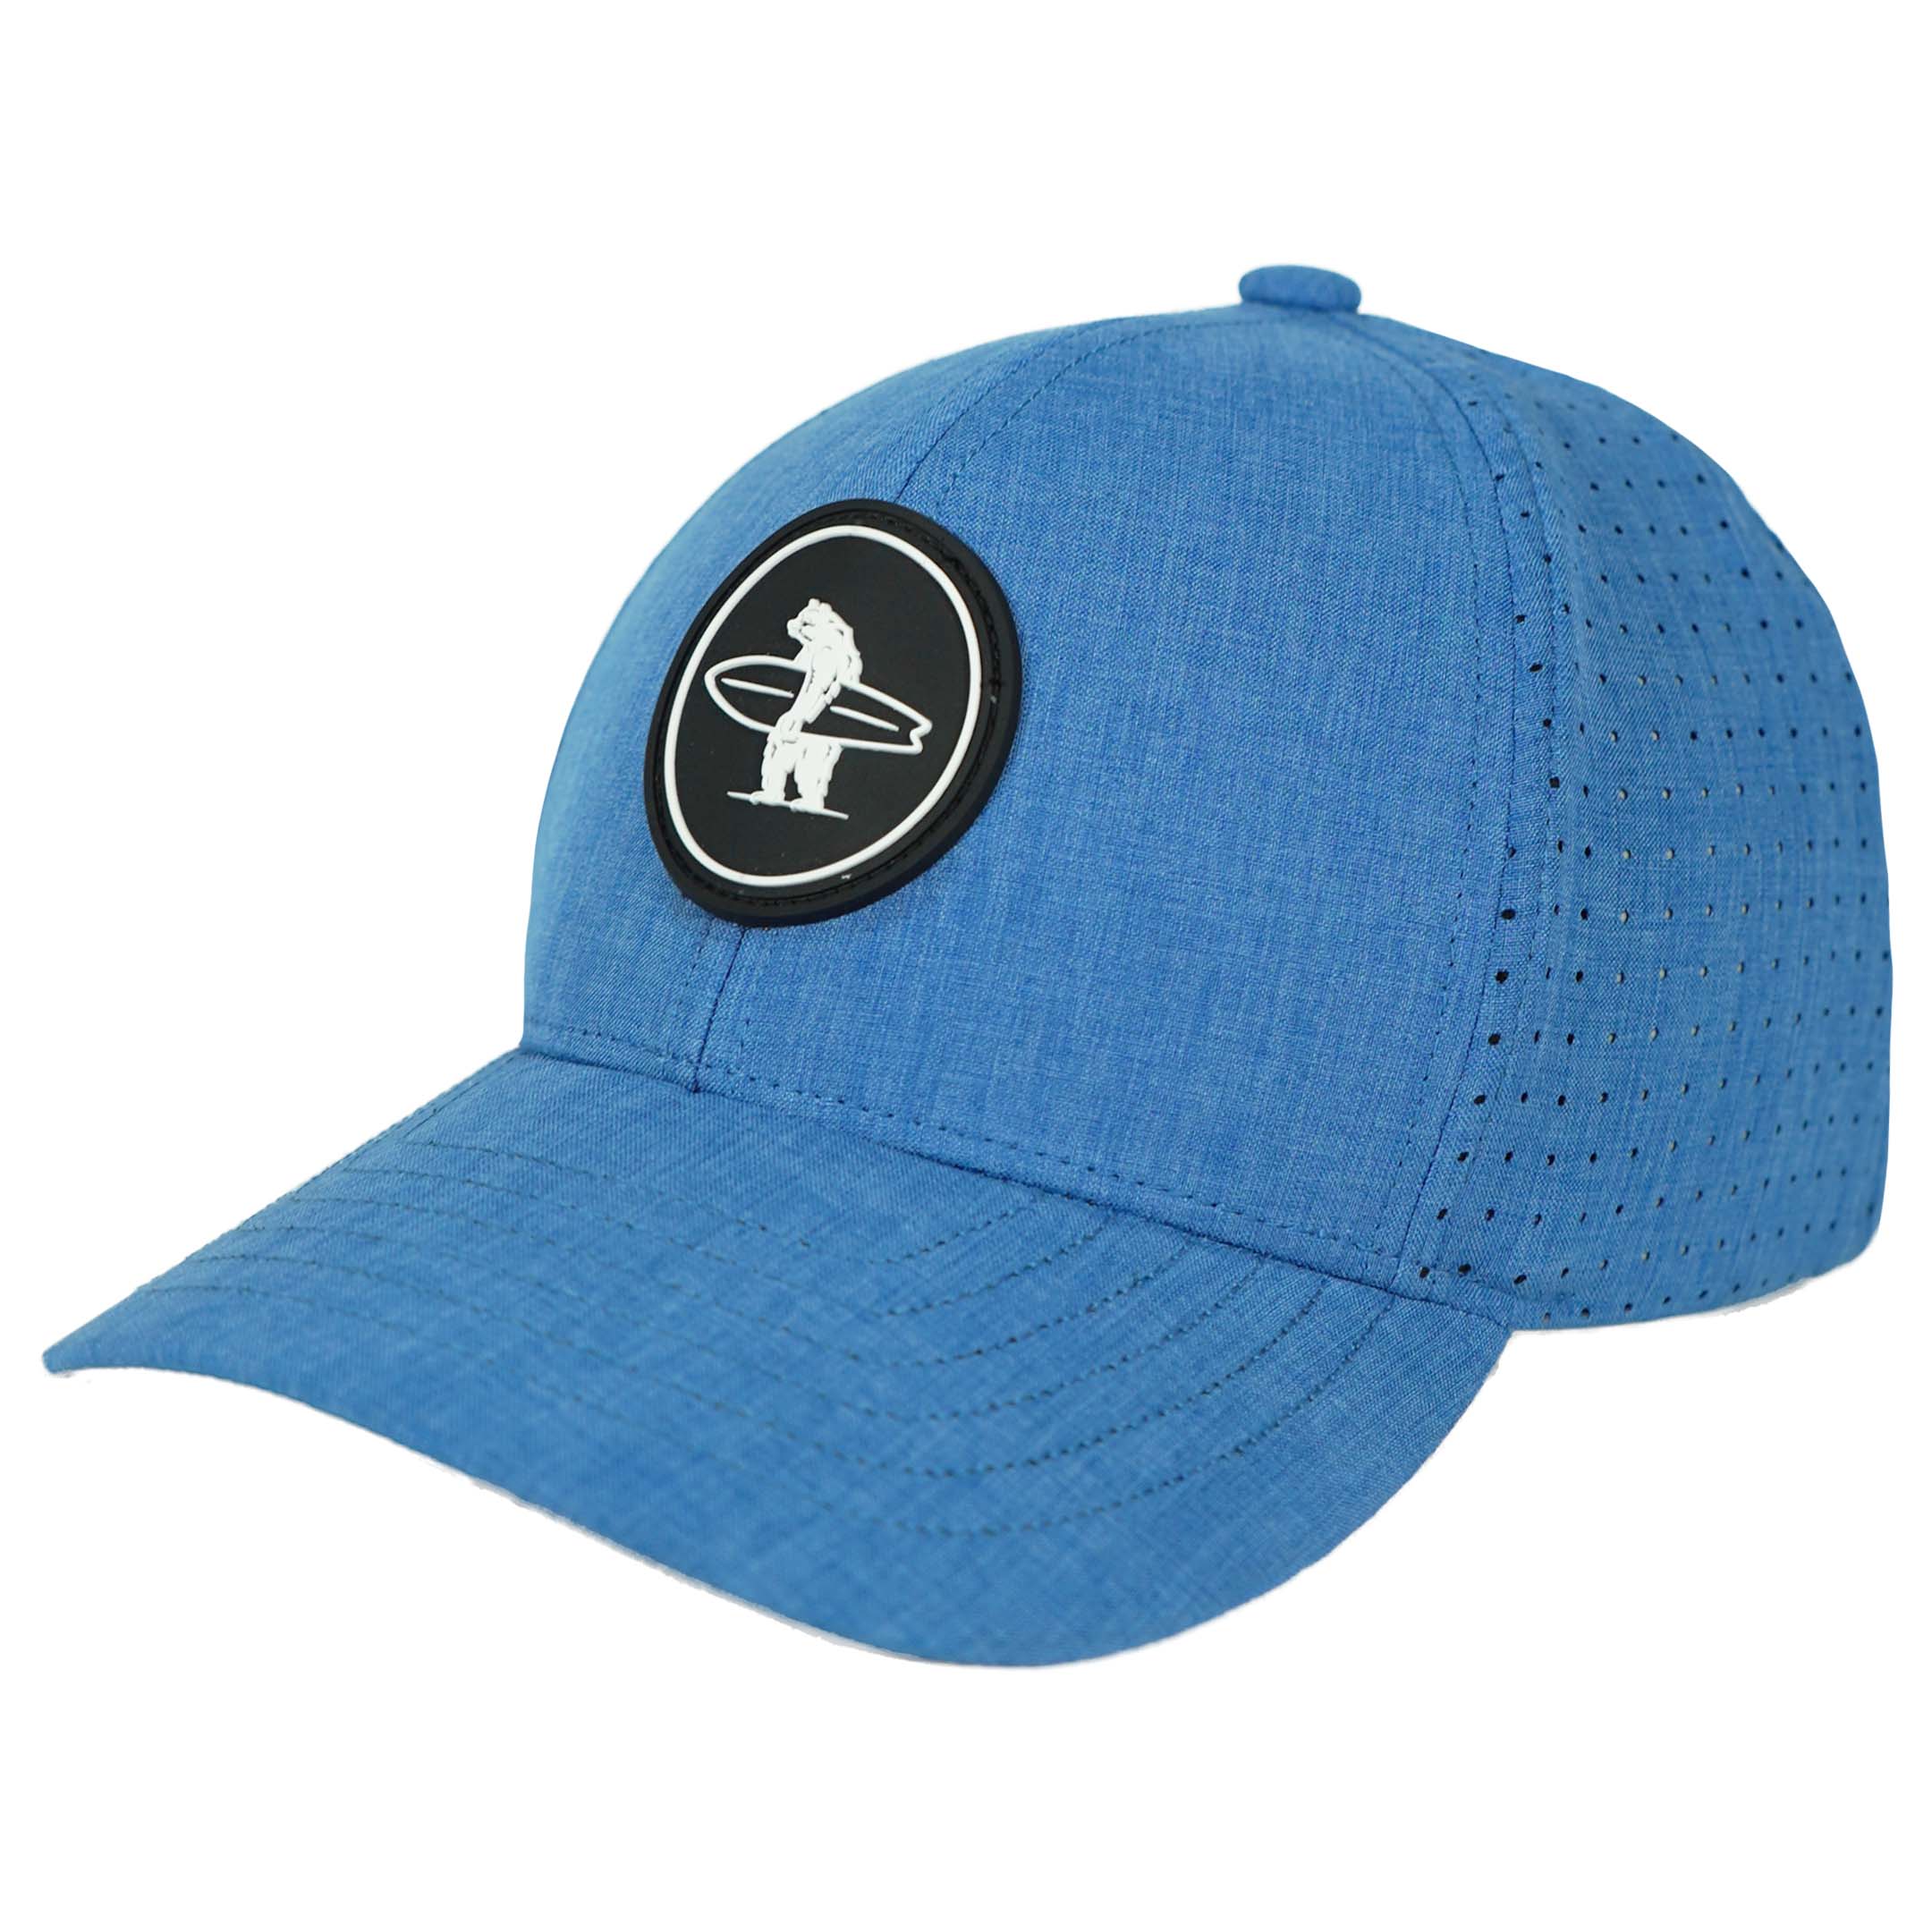 Diego Performance Hat in French Blue from Everyday California 